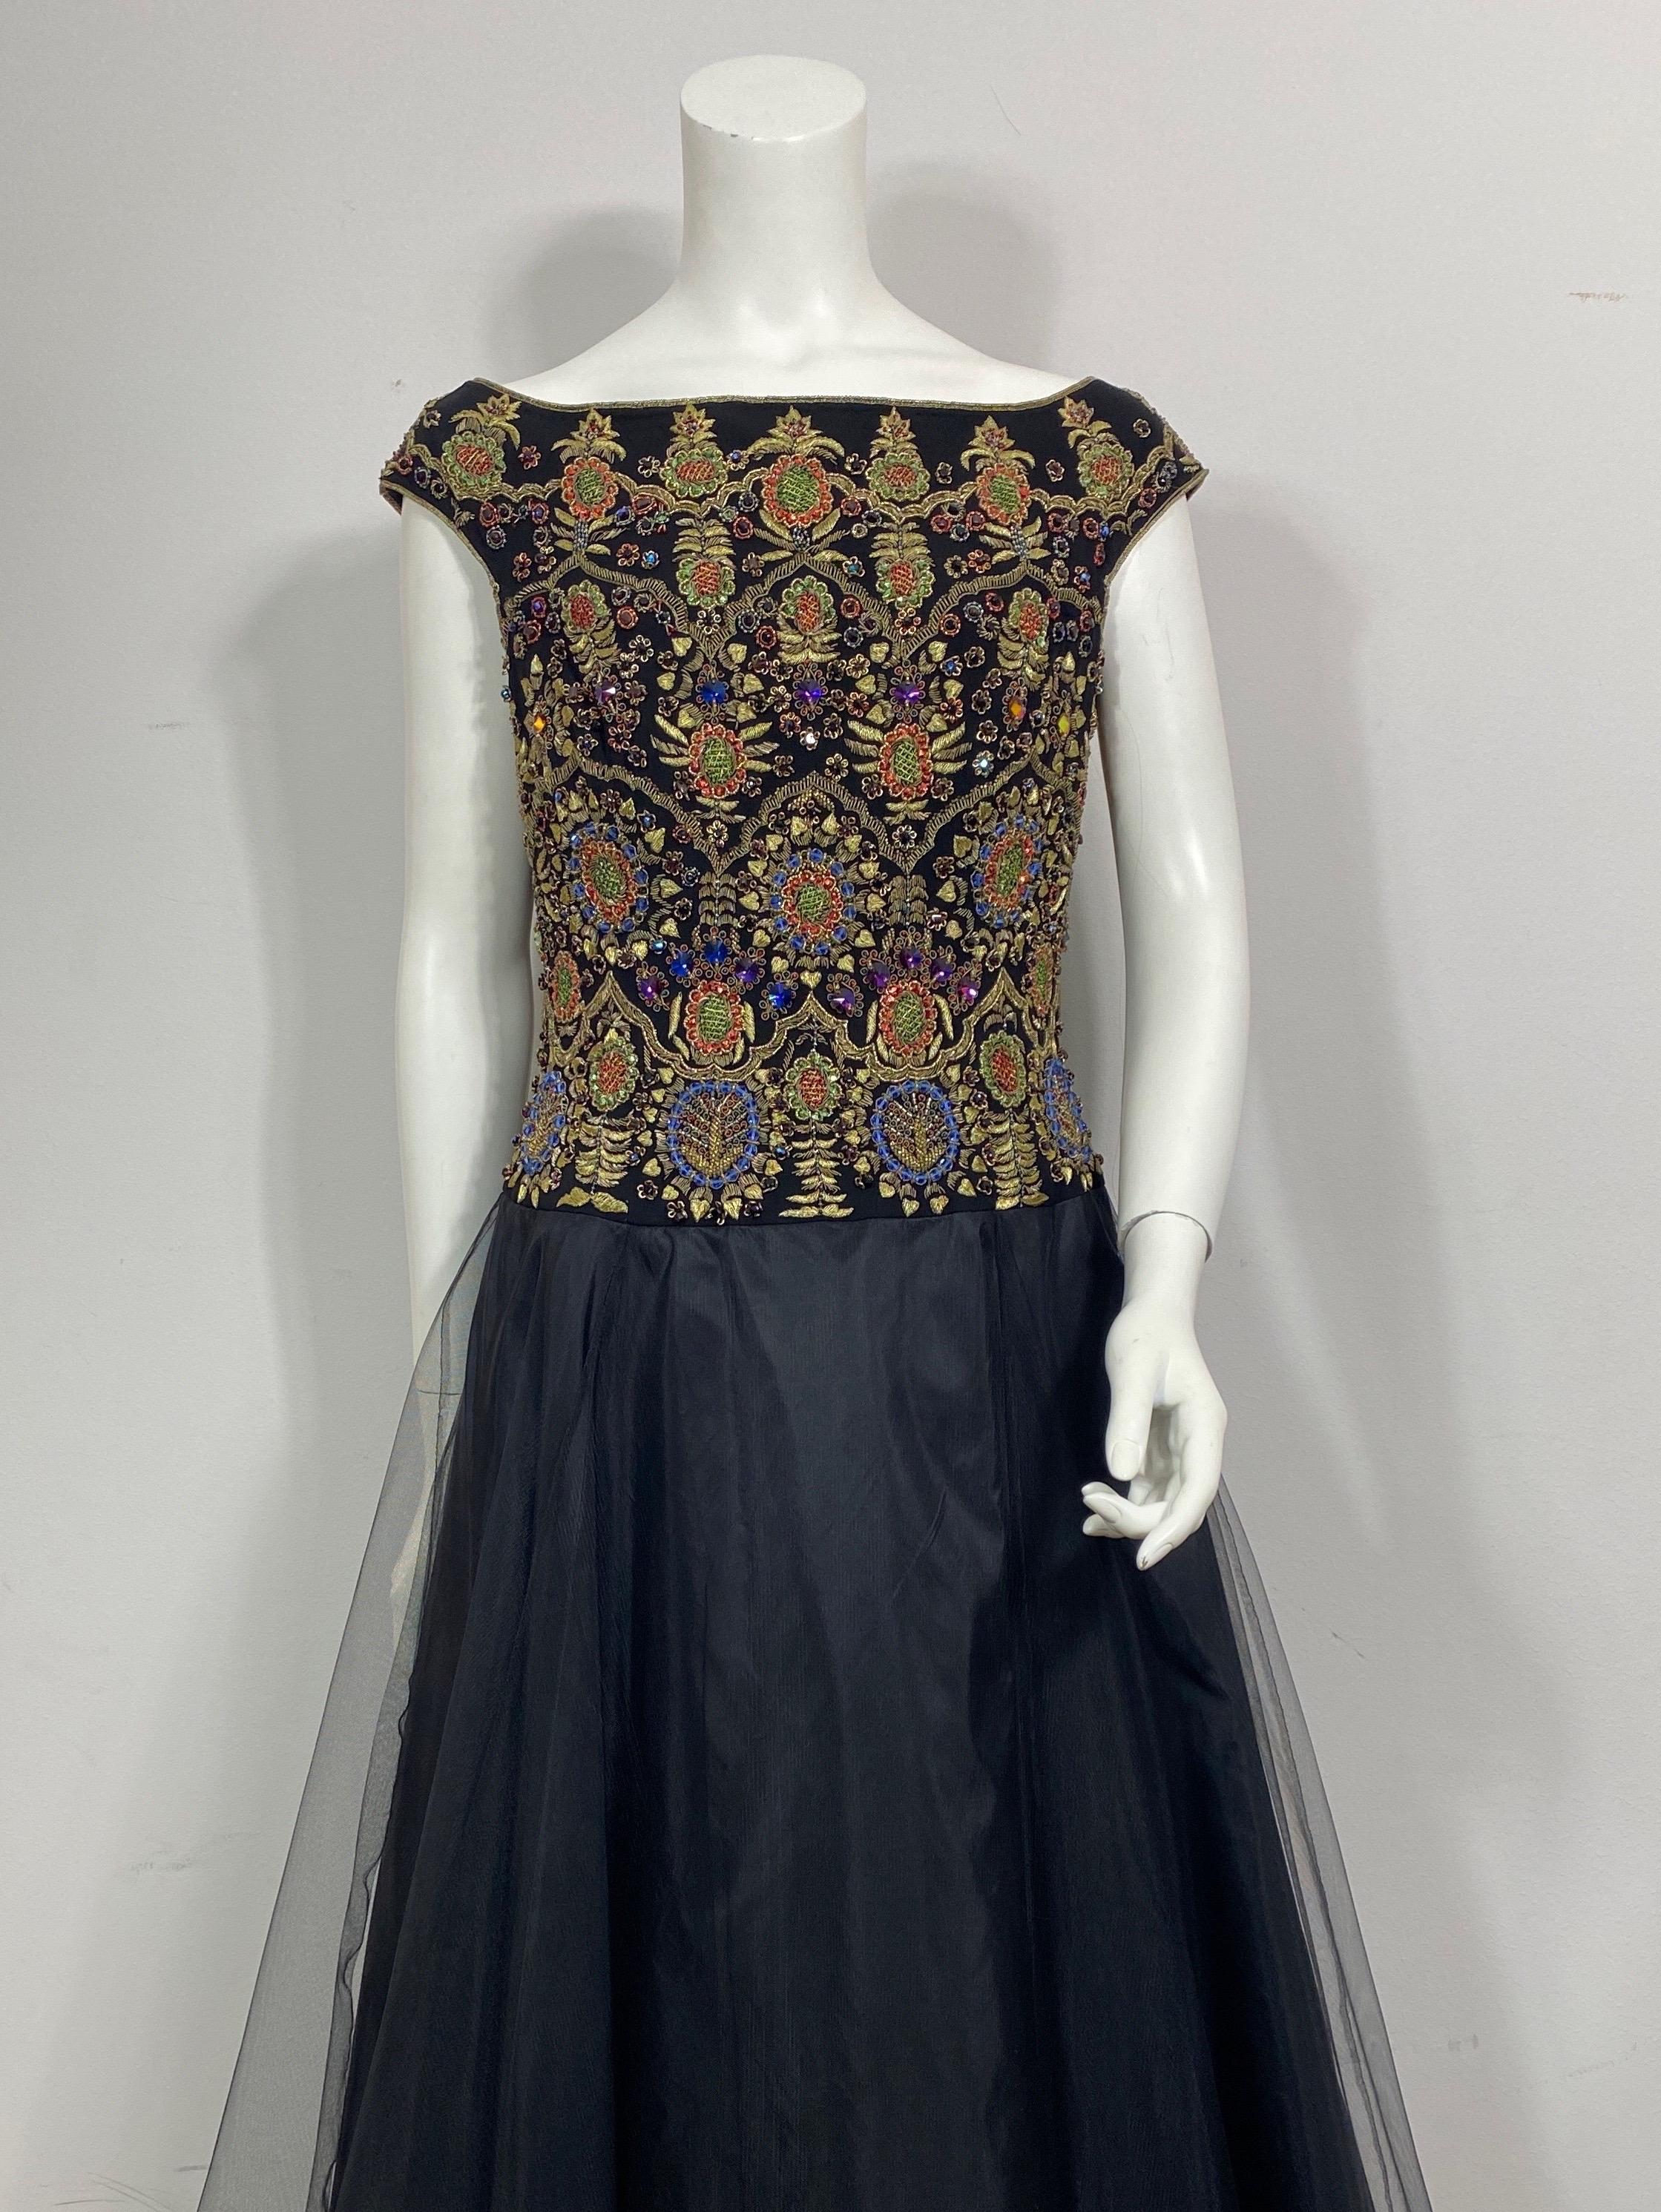 Women's Escada 1990’s Black Silk and Tulle Gown w/ Heavily Beaded Bodice - Size 38 For Sale